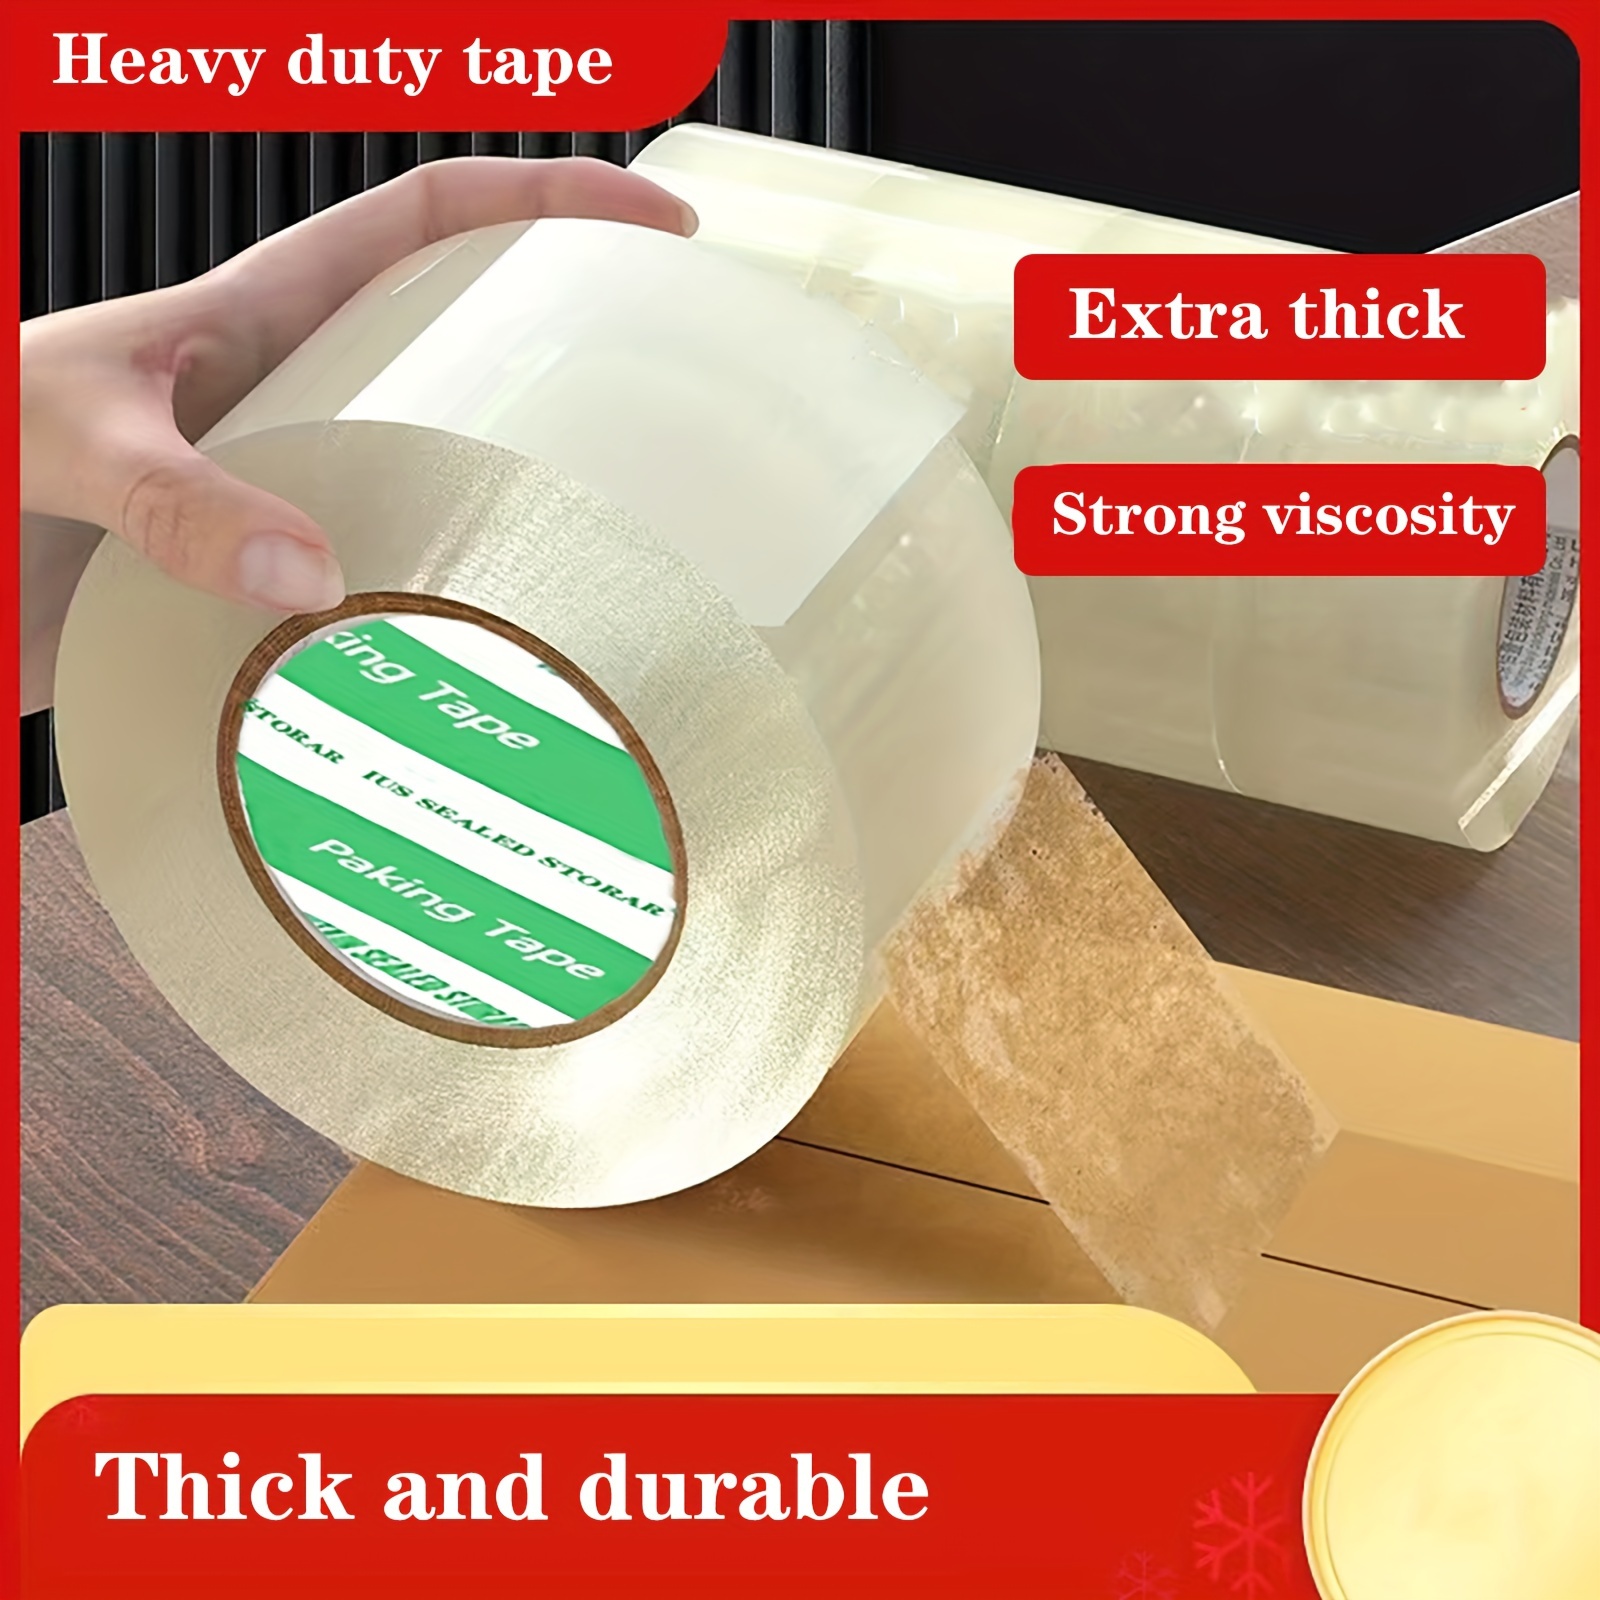 

1pc Of Heavy Duty Packaging Tape, 40y-80y2.4 Mil 1.89in Extra Thick Super Adhesive For Packaging Large Pieces Or Heavy Duty Goods, Suitable For Factory, Office